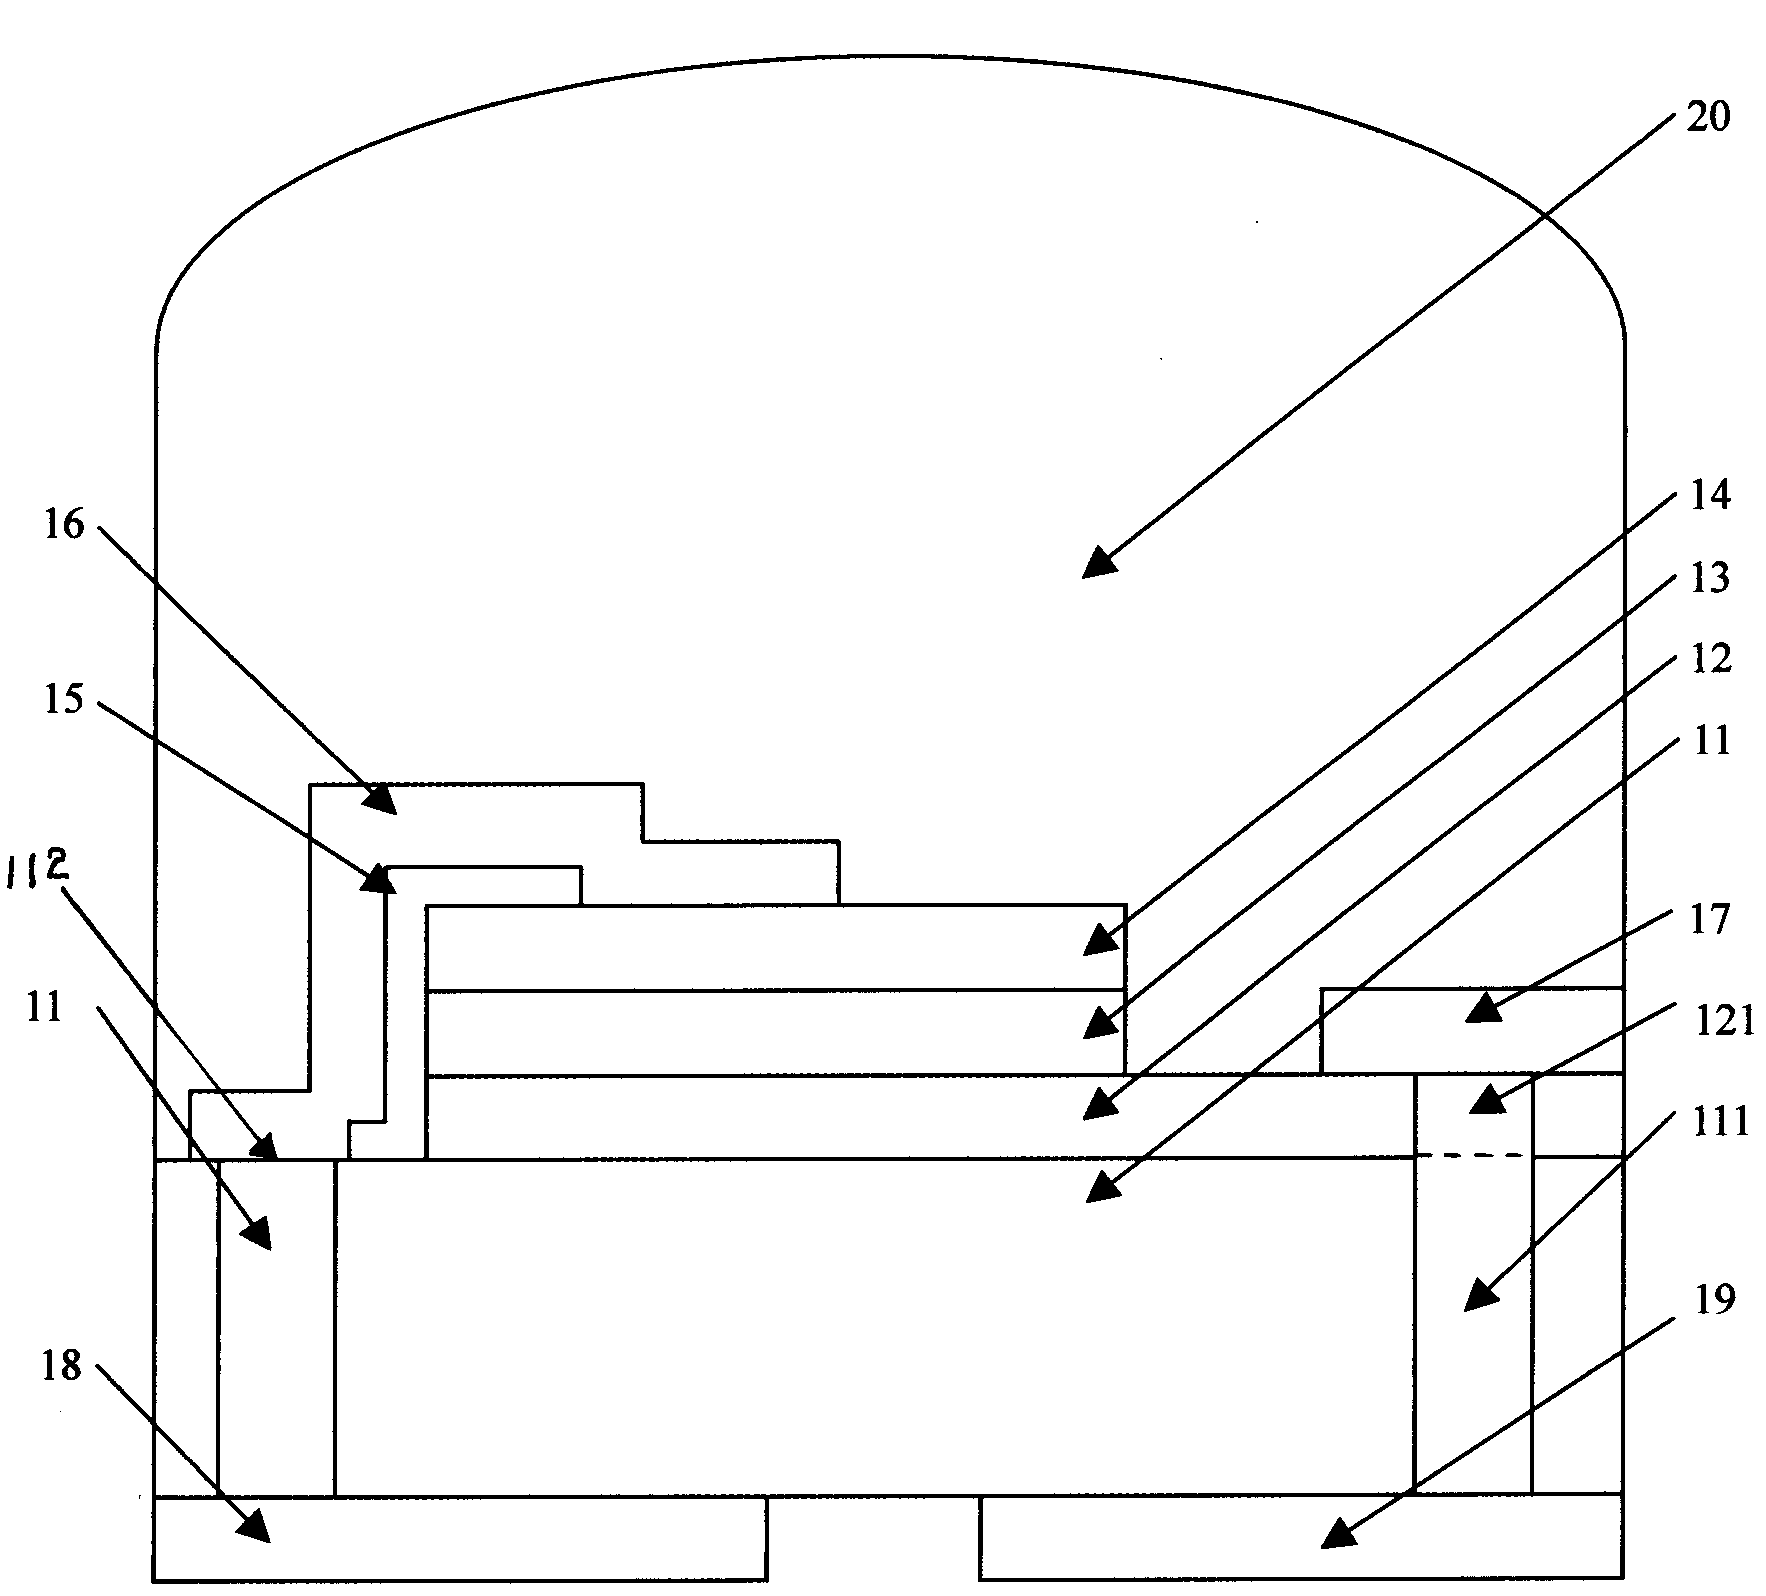 Light emitting diode (LED) packaging structure